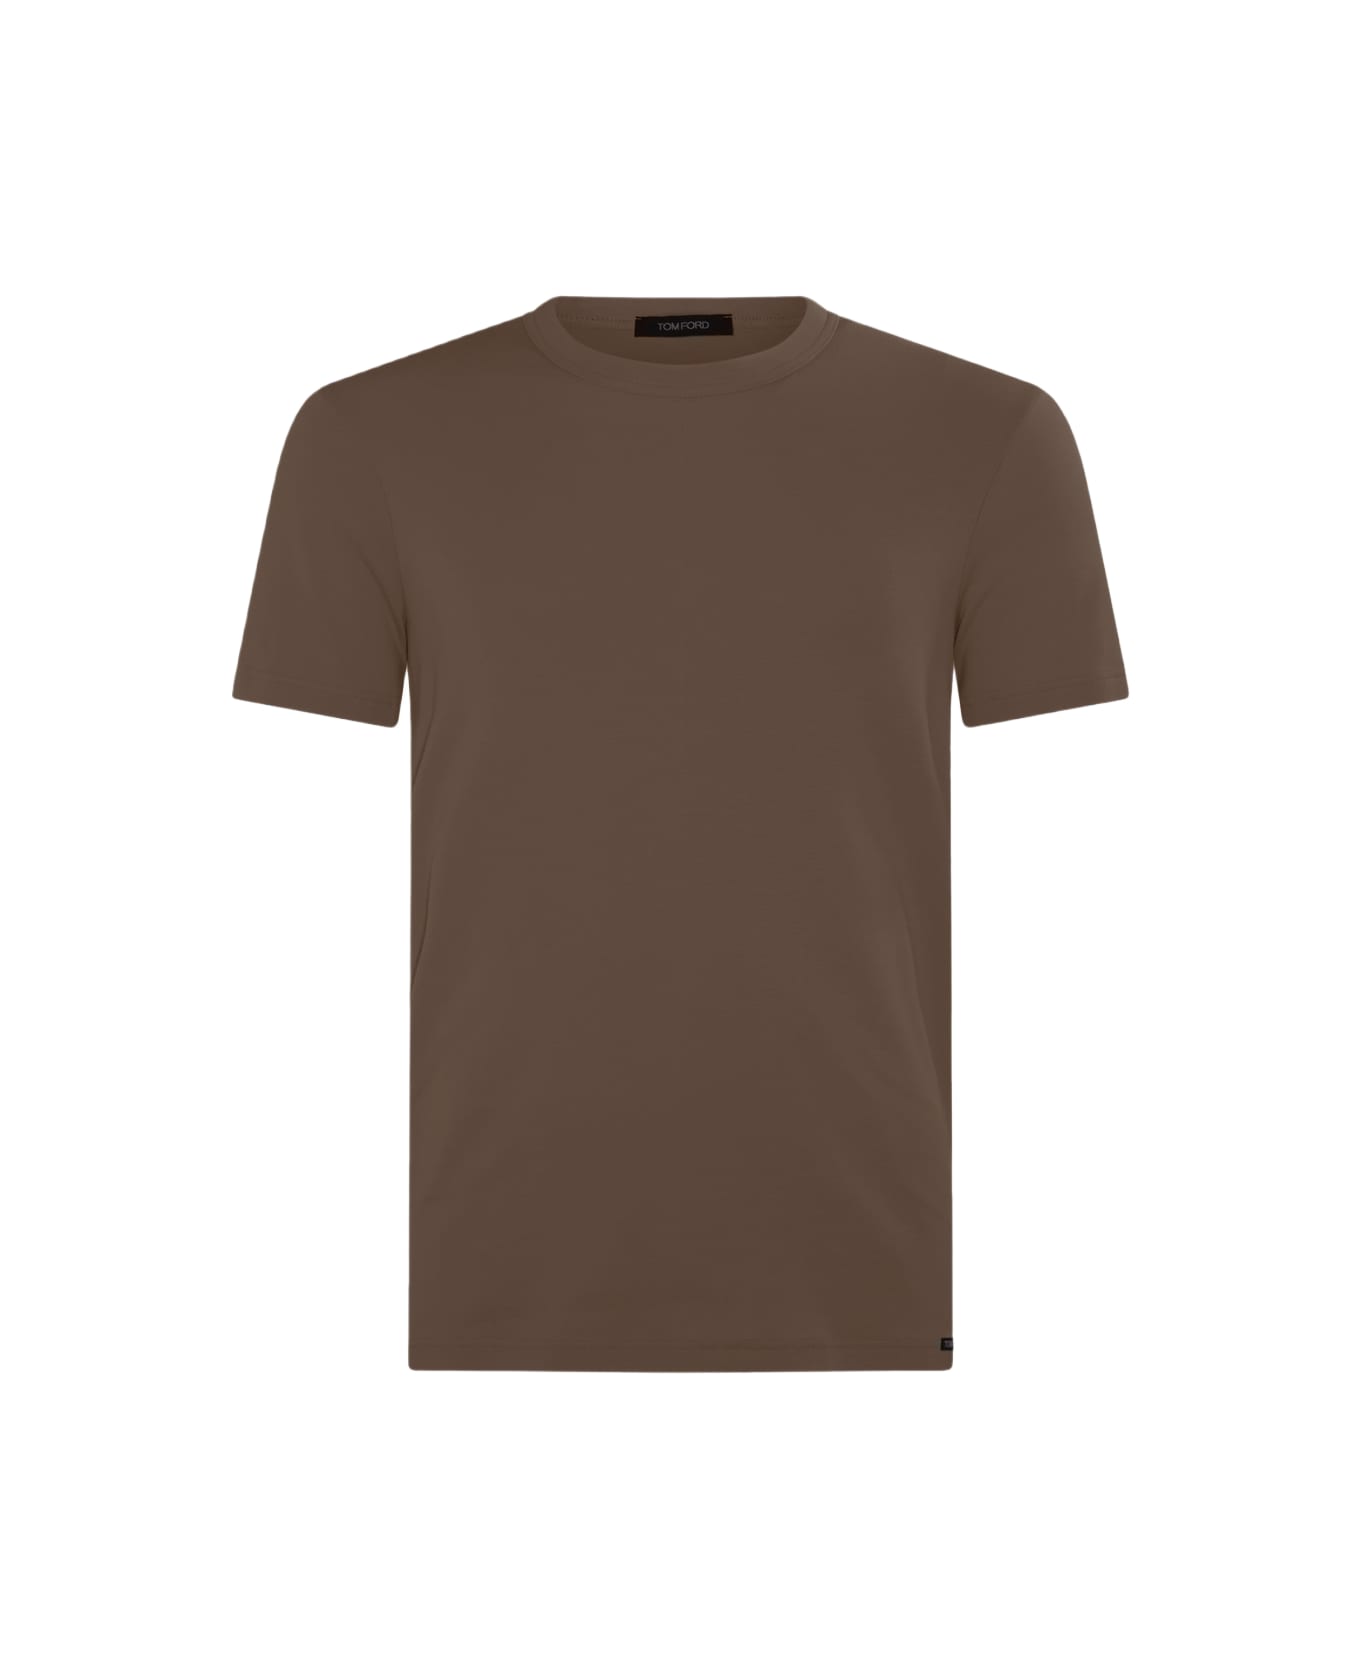 Tom Ford Nude Cotton T-shirt - NUDE 7